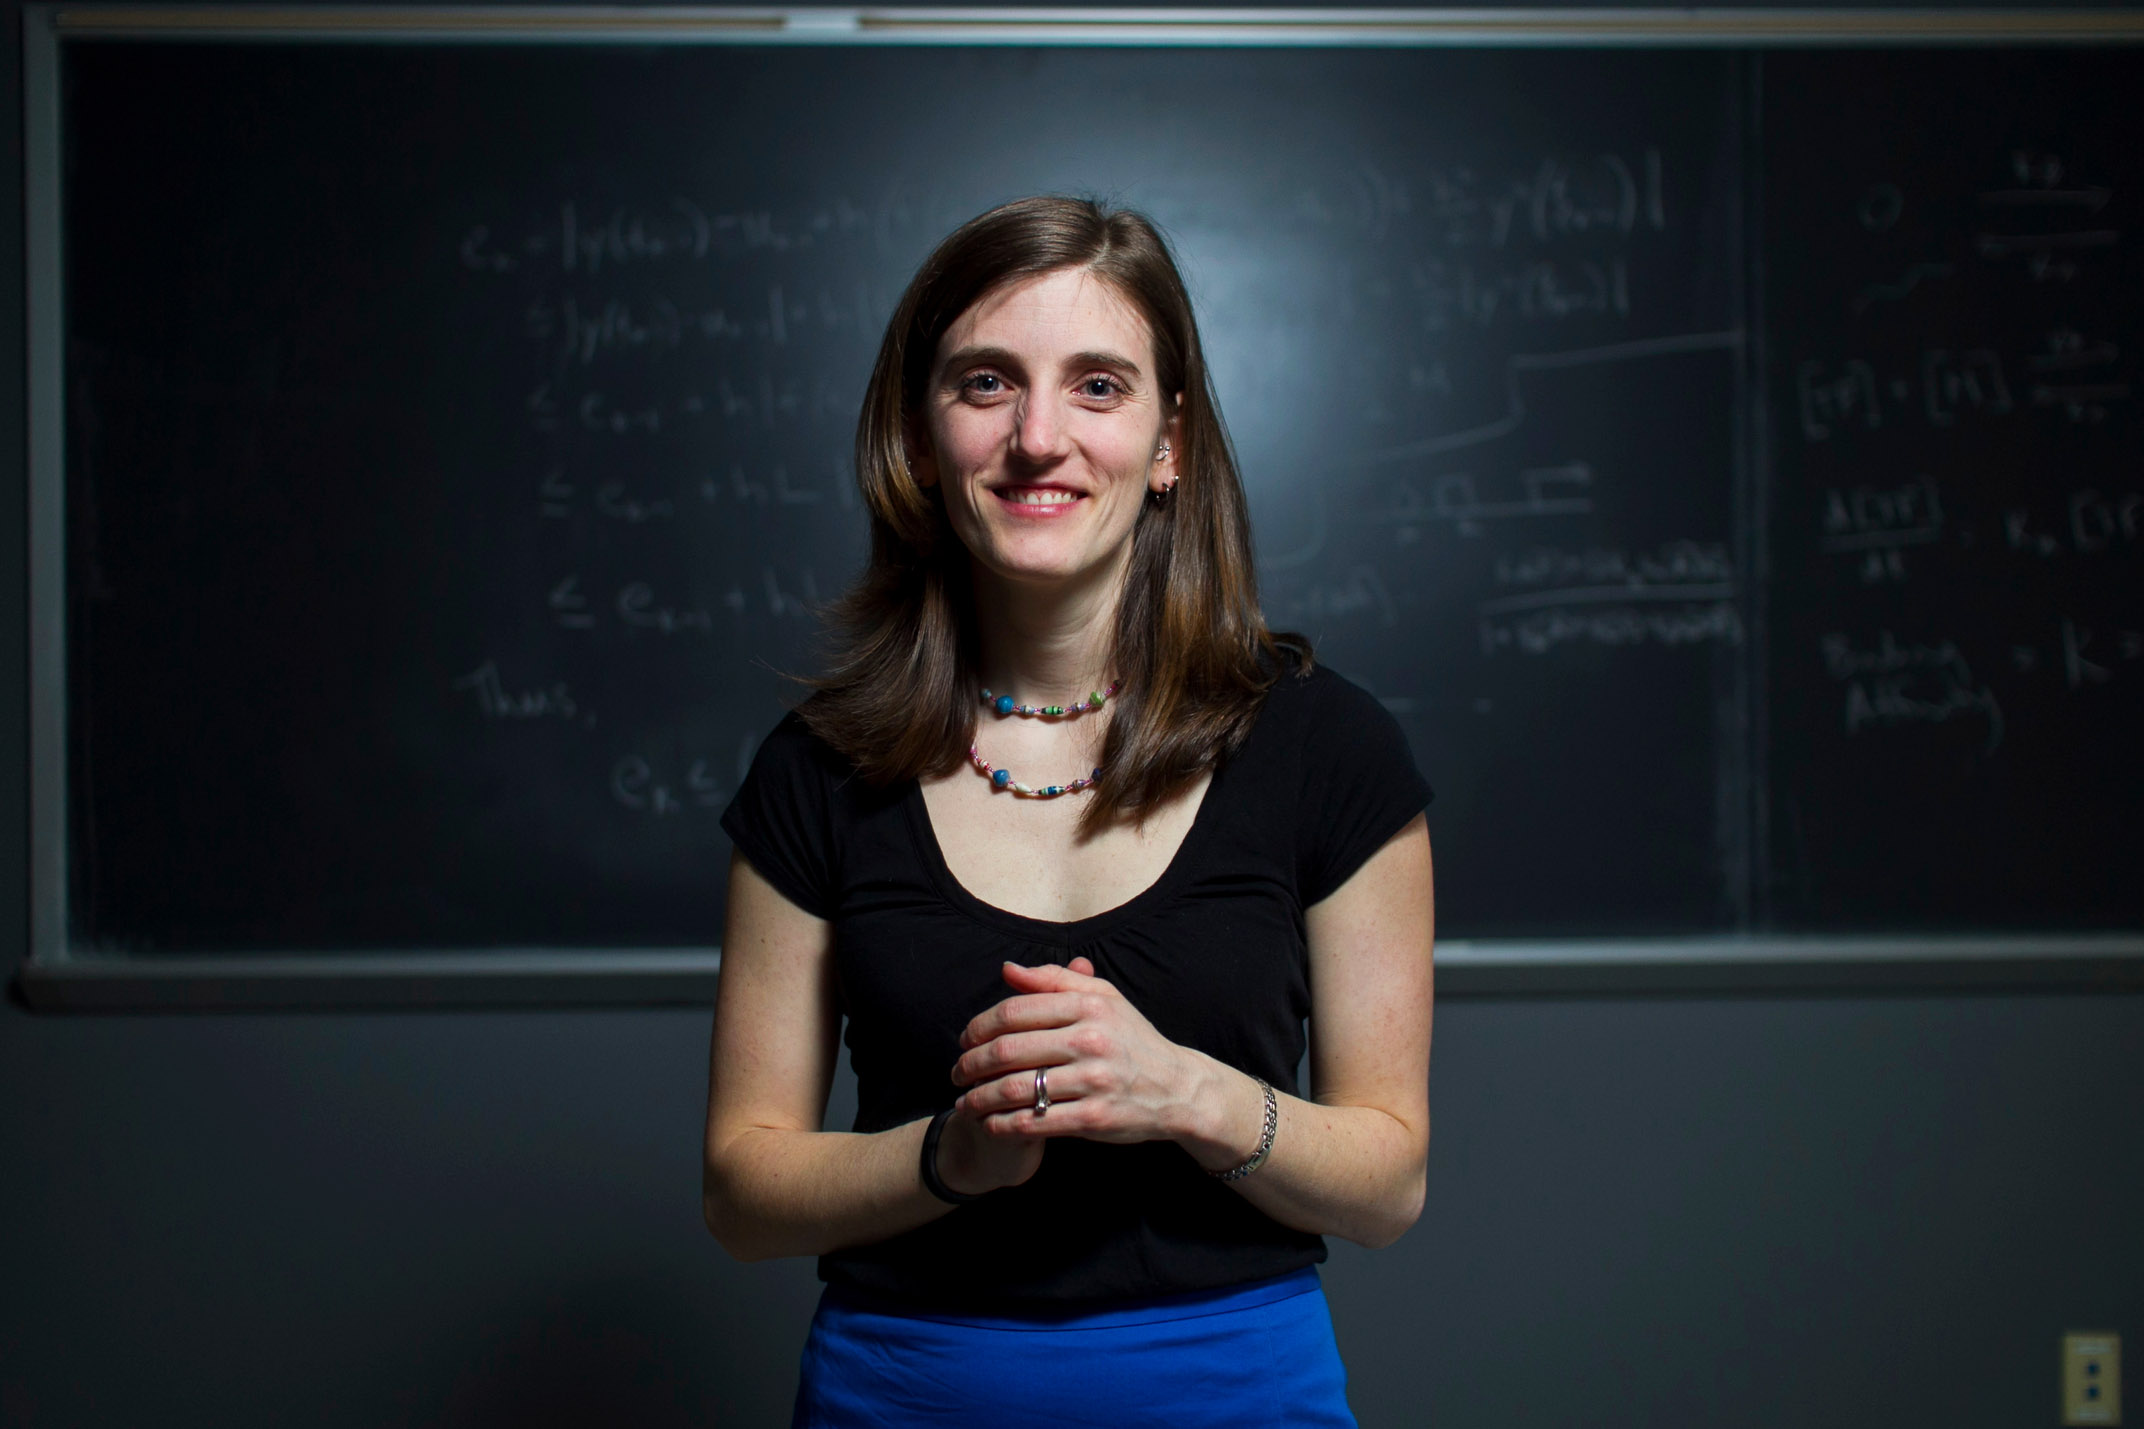  Clark University Math Professor Jackie Dresch poses for a photo in a computer lab on the campus of Clark University in Worcester, Massachusetts on January 27, 2016.  